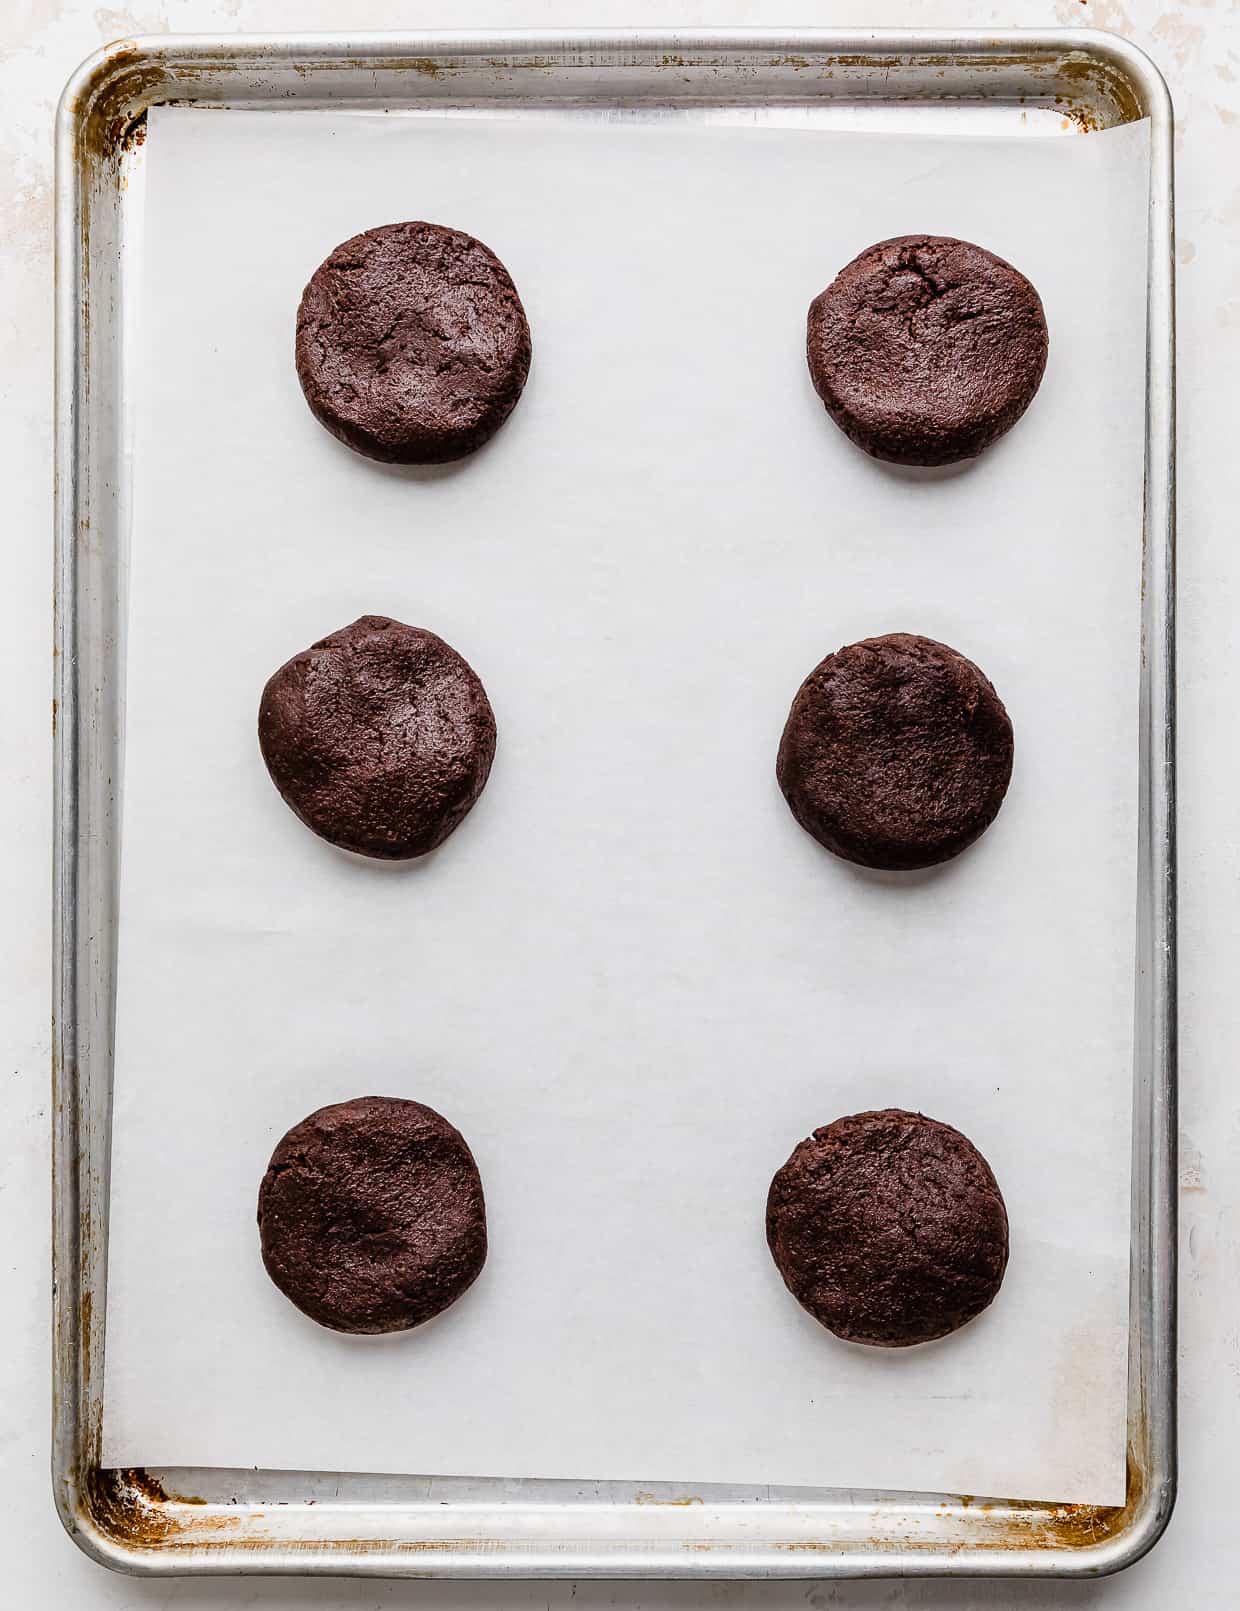 Six chocolate cookie dough balls on a white parchment paper lined baking sheet.